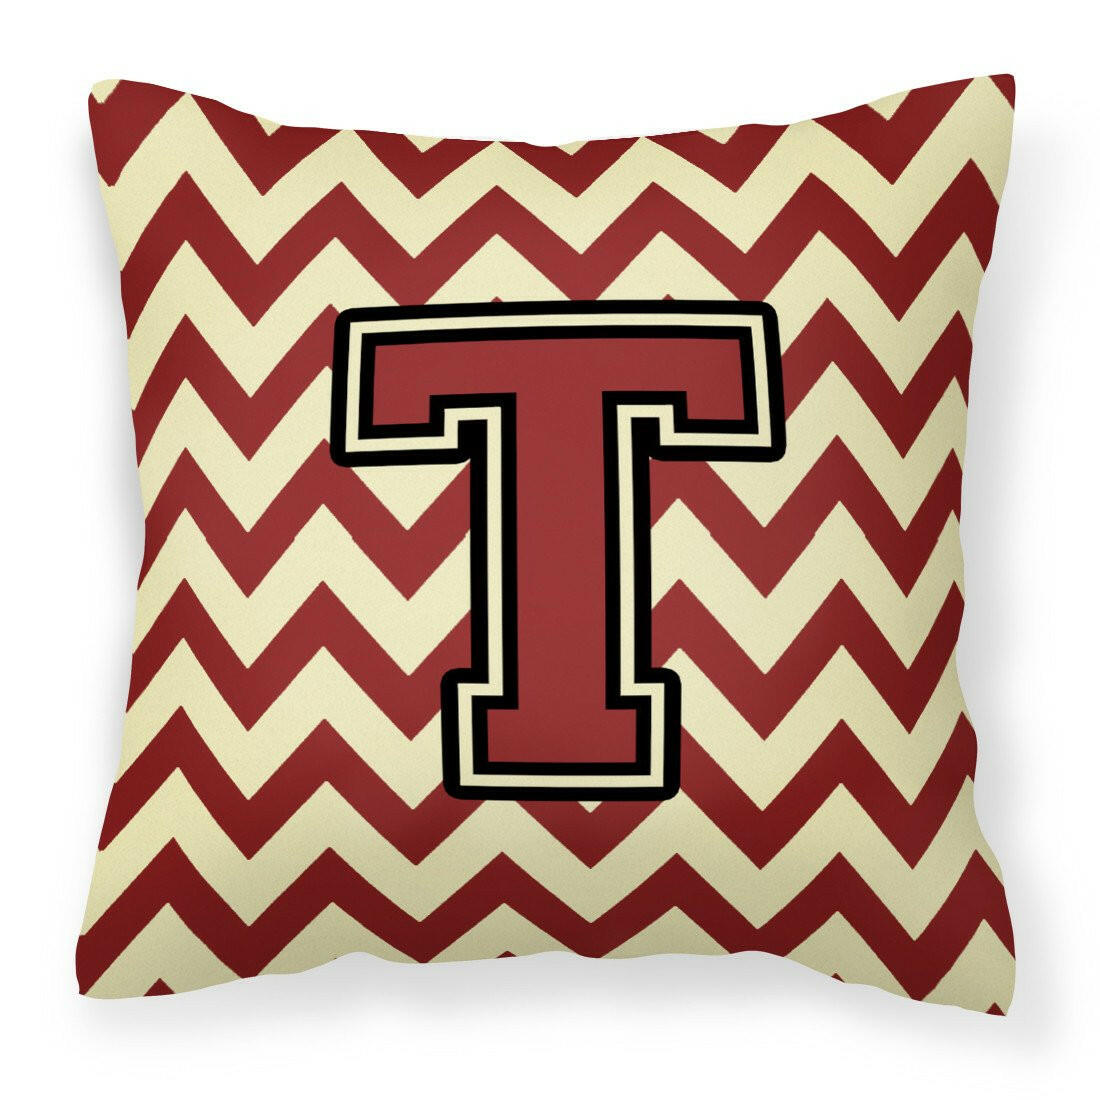 Letter T Chevron Maroon and Gold Fabric Decorative Pillow CJ1061-TPW1414 by Caroline's Treasures